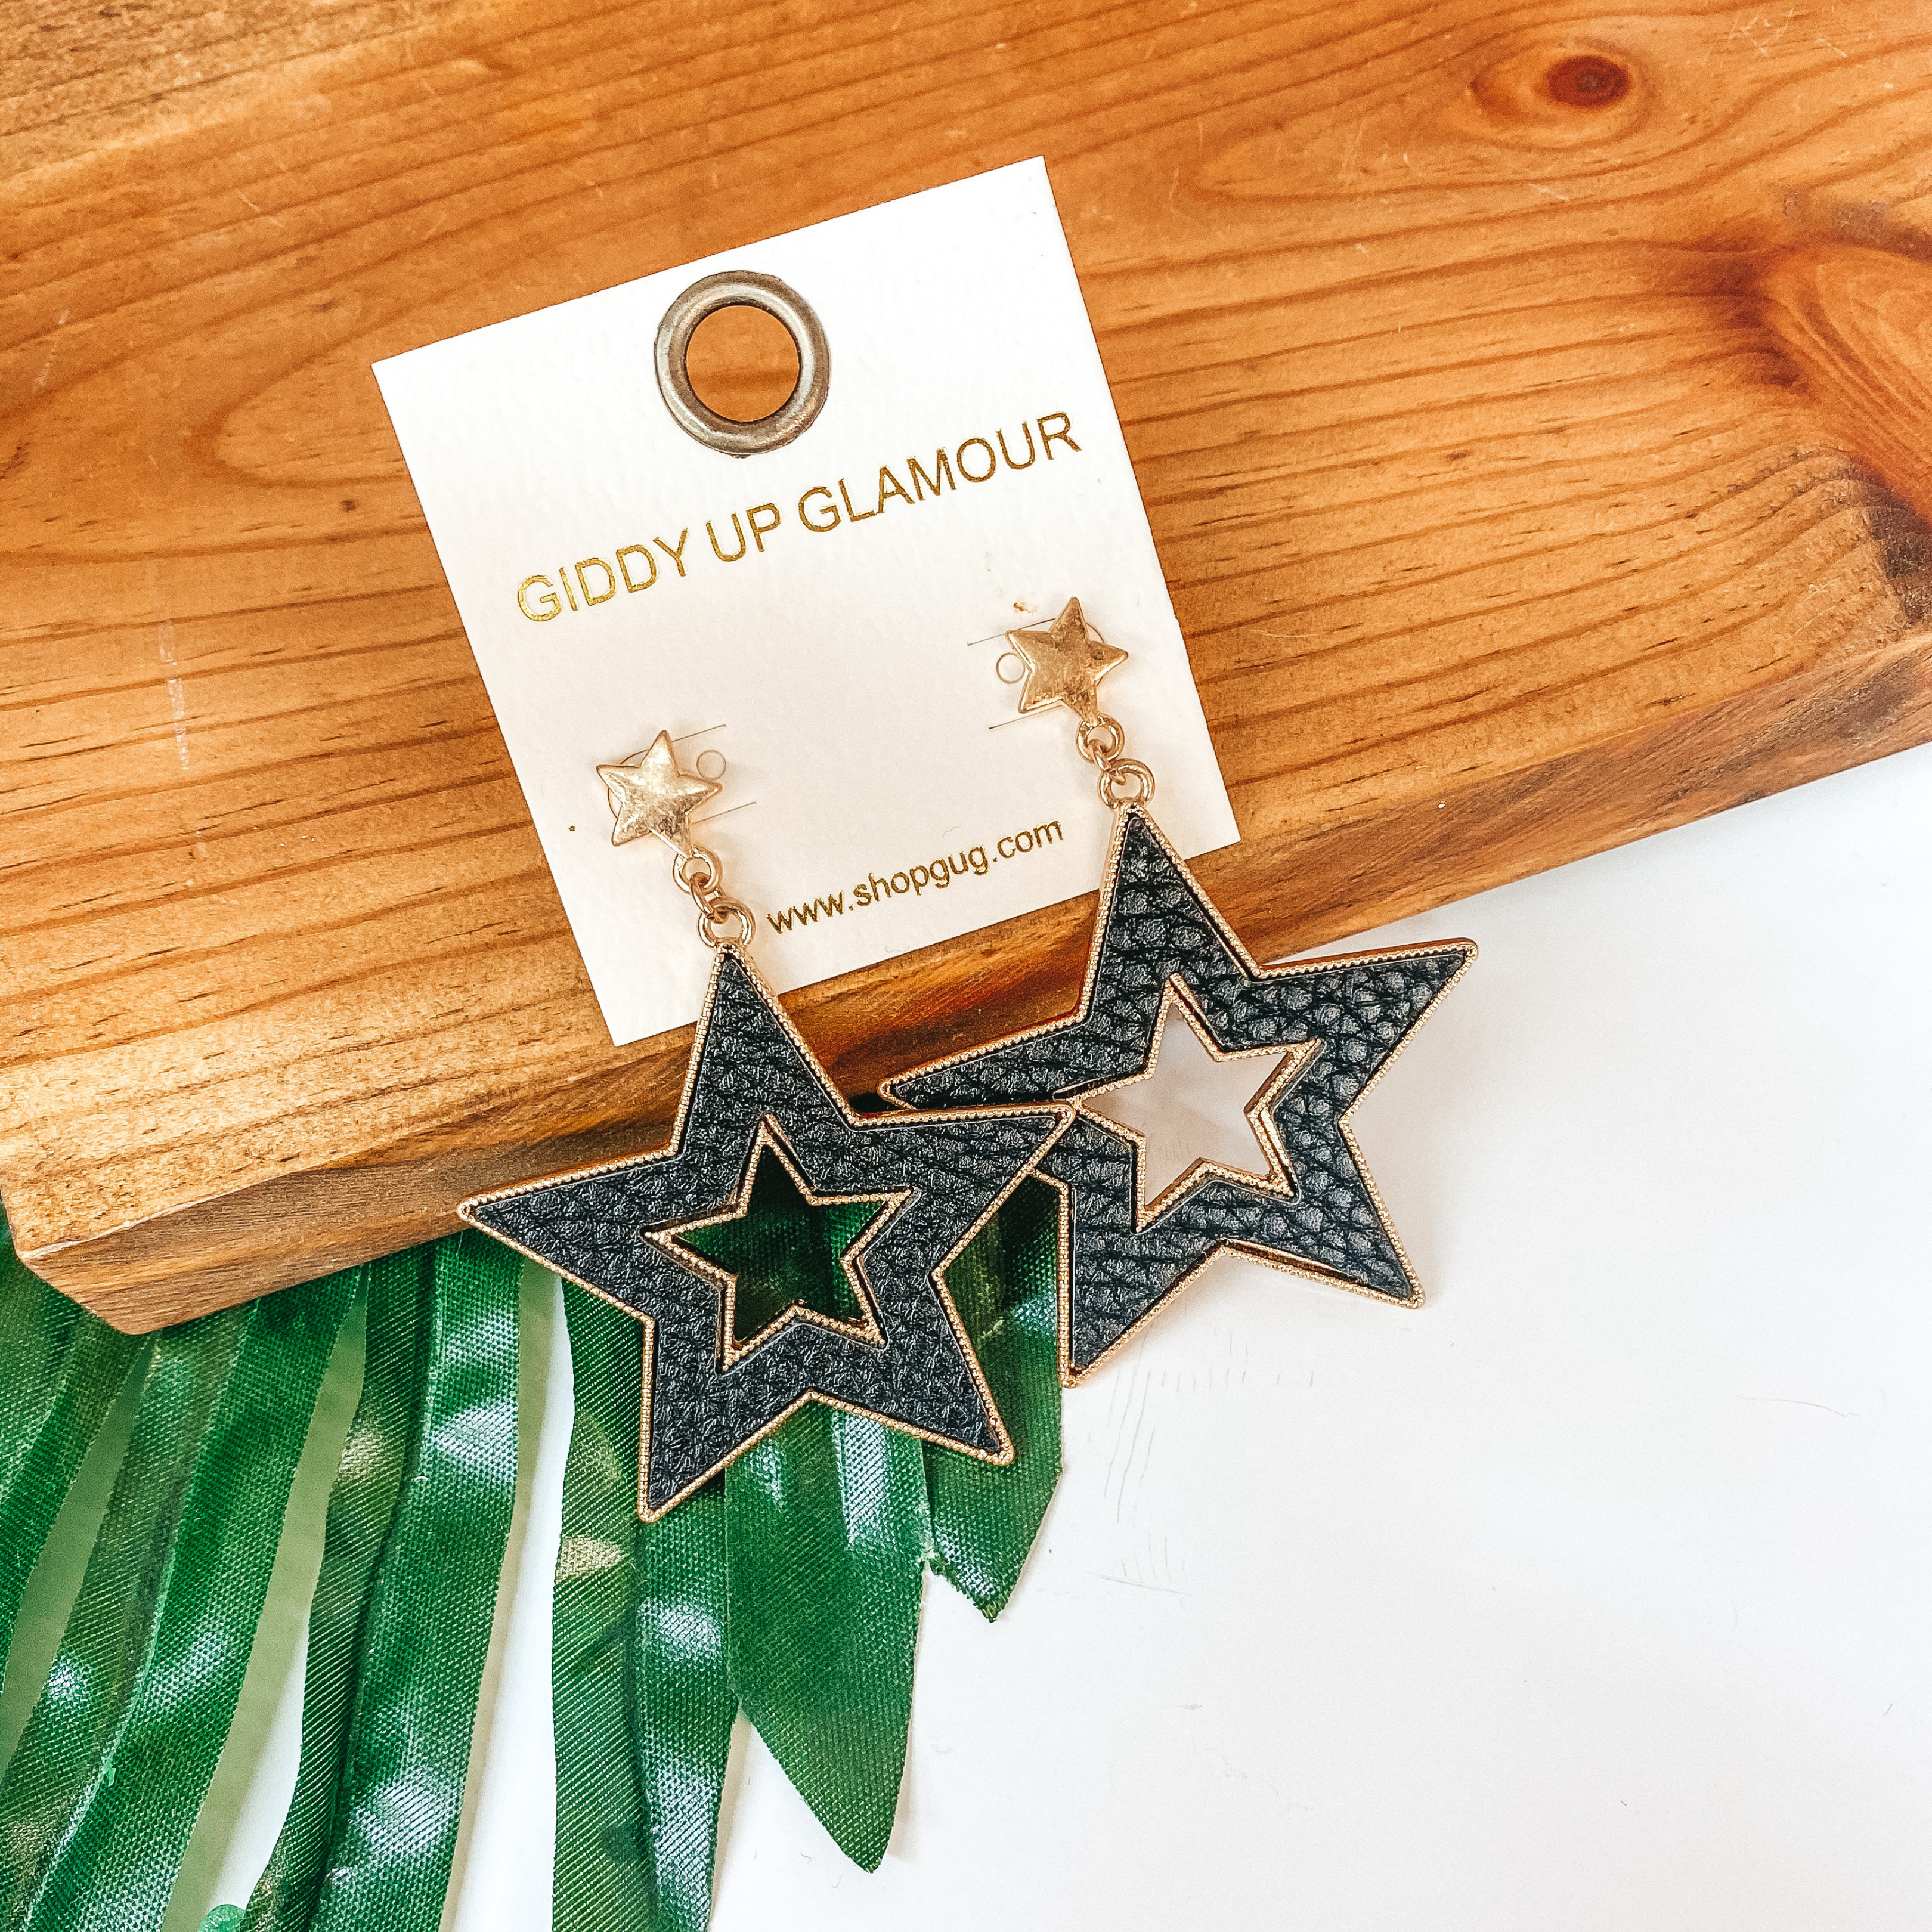 She's a Star Gold Post Dangle Earrings with Leather Star in Black - Giddy Up Glamour Boutique